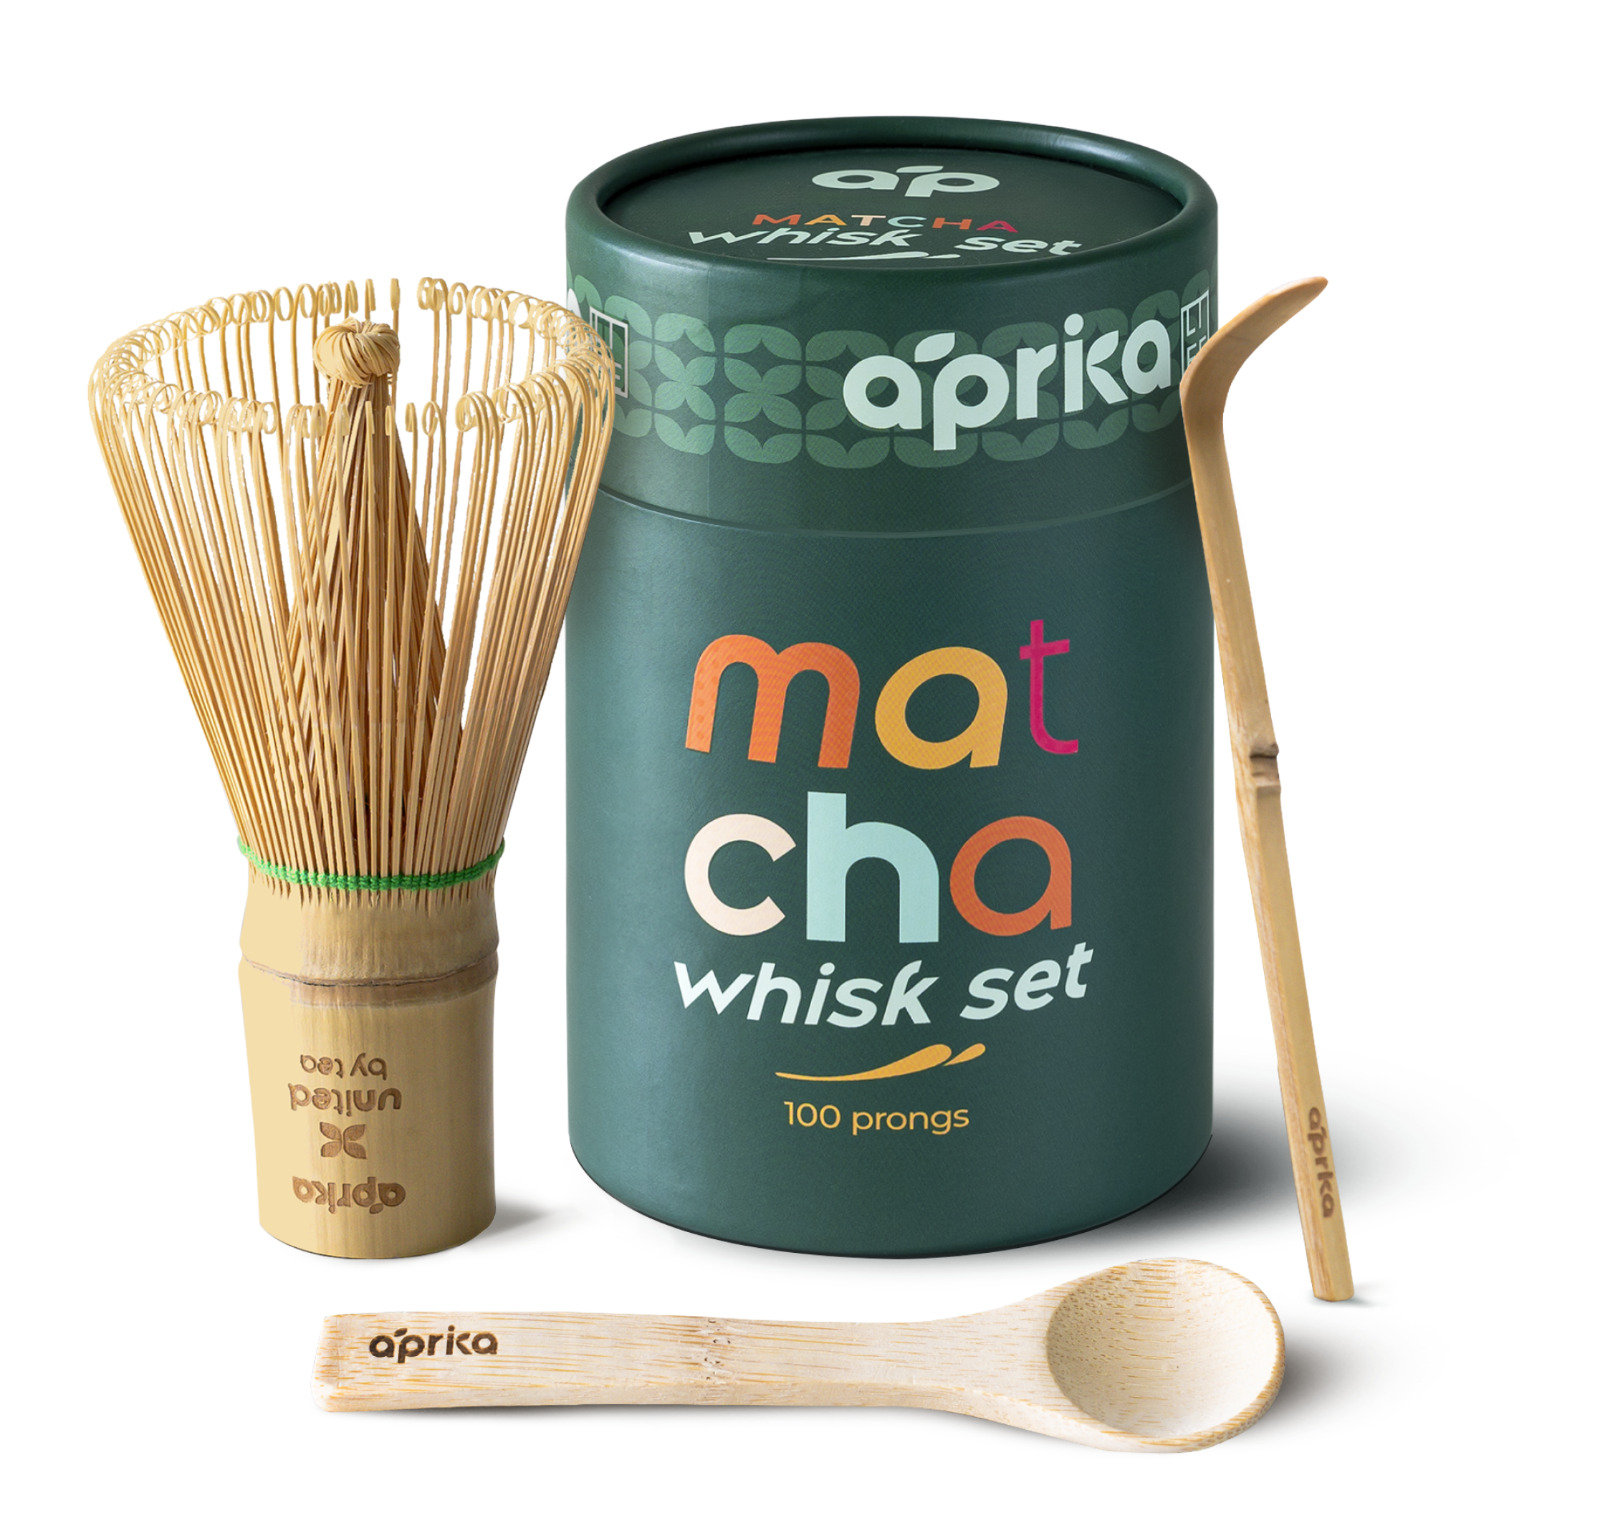 Bamboo Matcha Whisk Set: Whisk (Chasen) with 100 Prongs, Scoop (Chashaku), Spoon